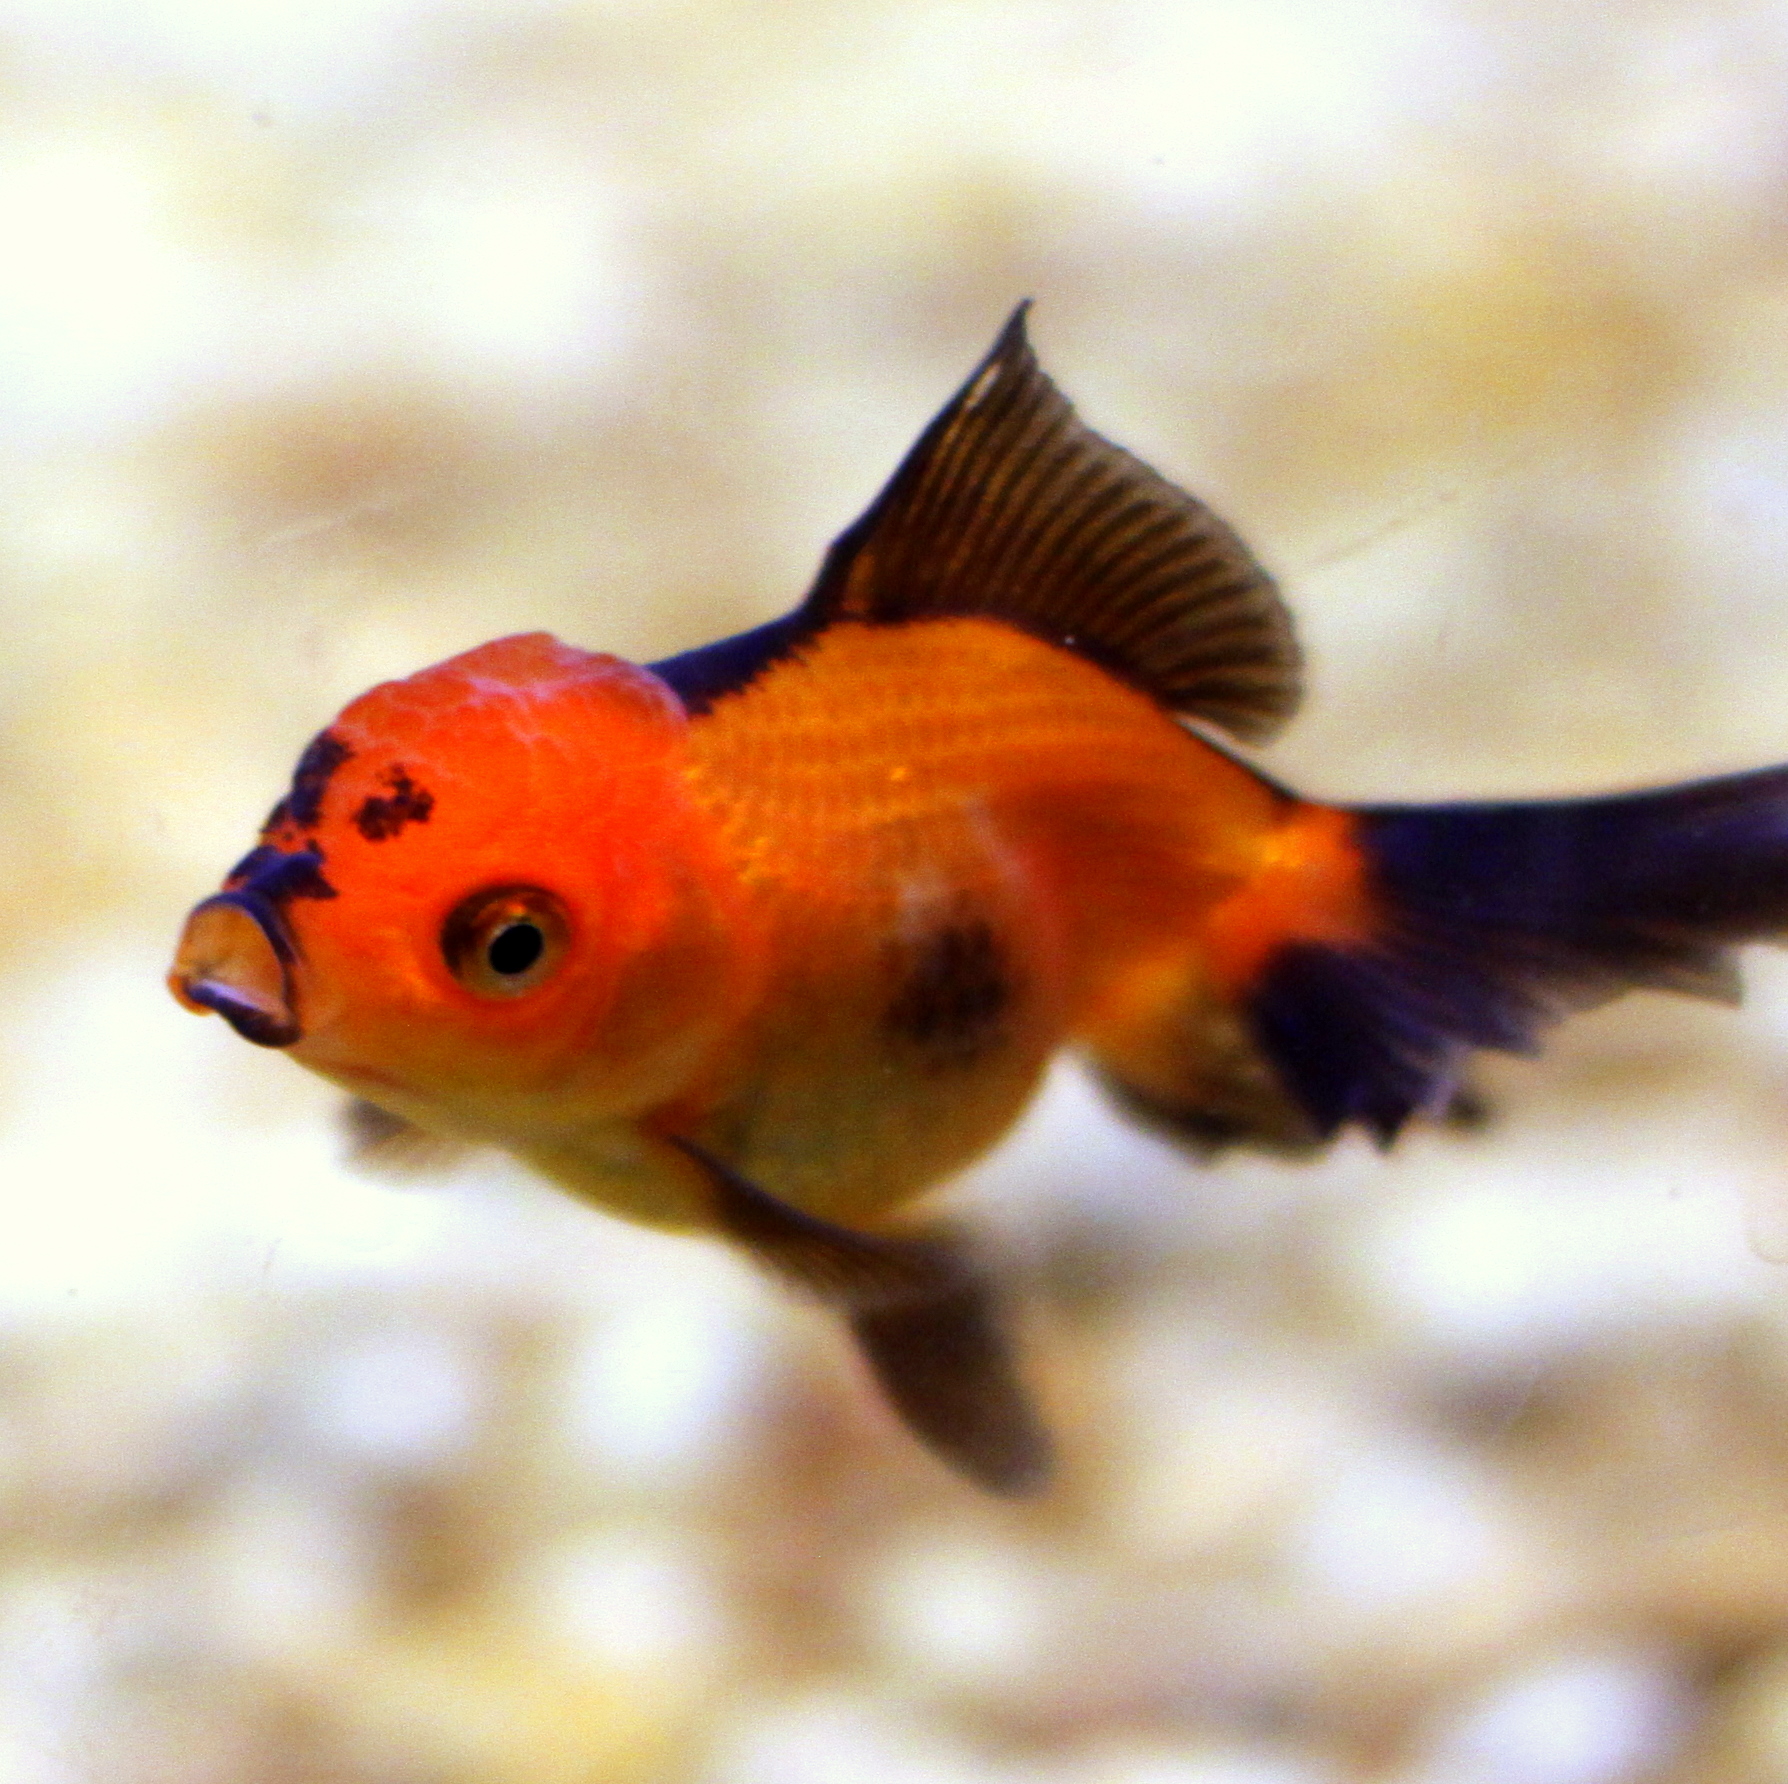 the orange and black fish is swimming on the sand